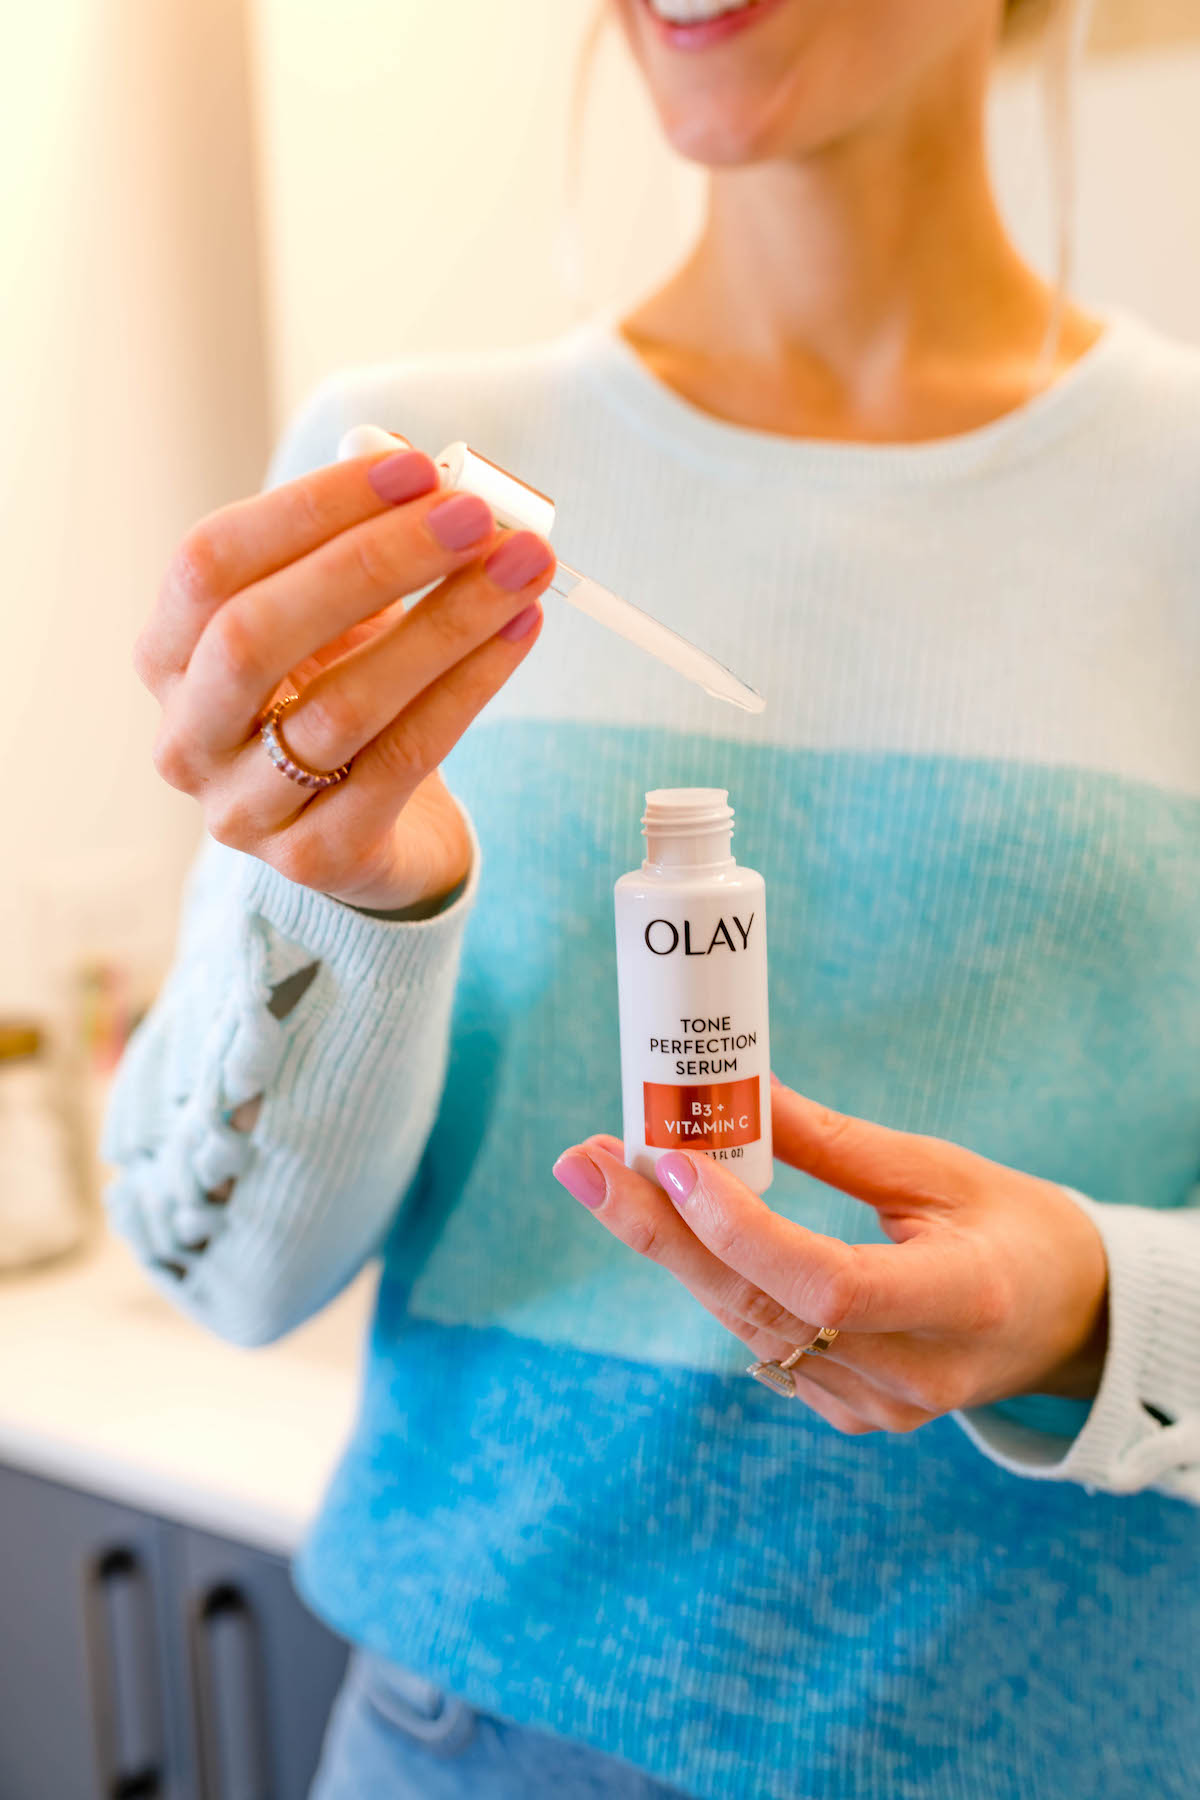 Olay Tone Perfection Serum Review